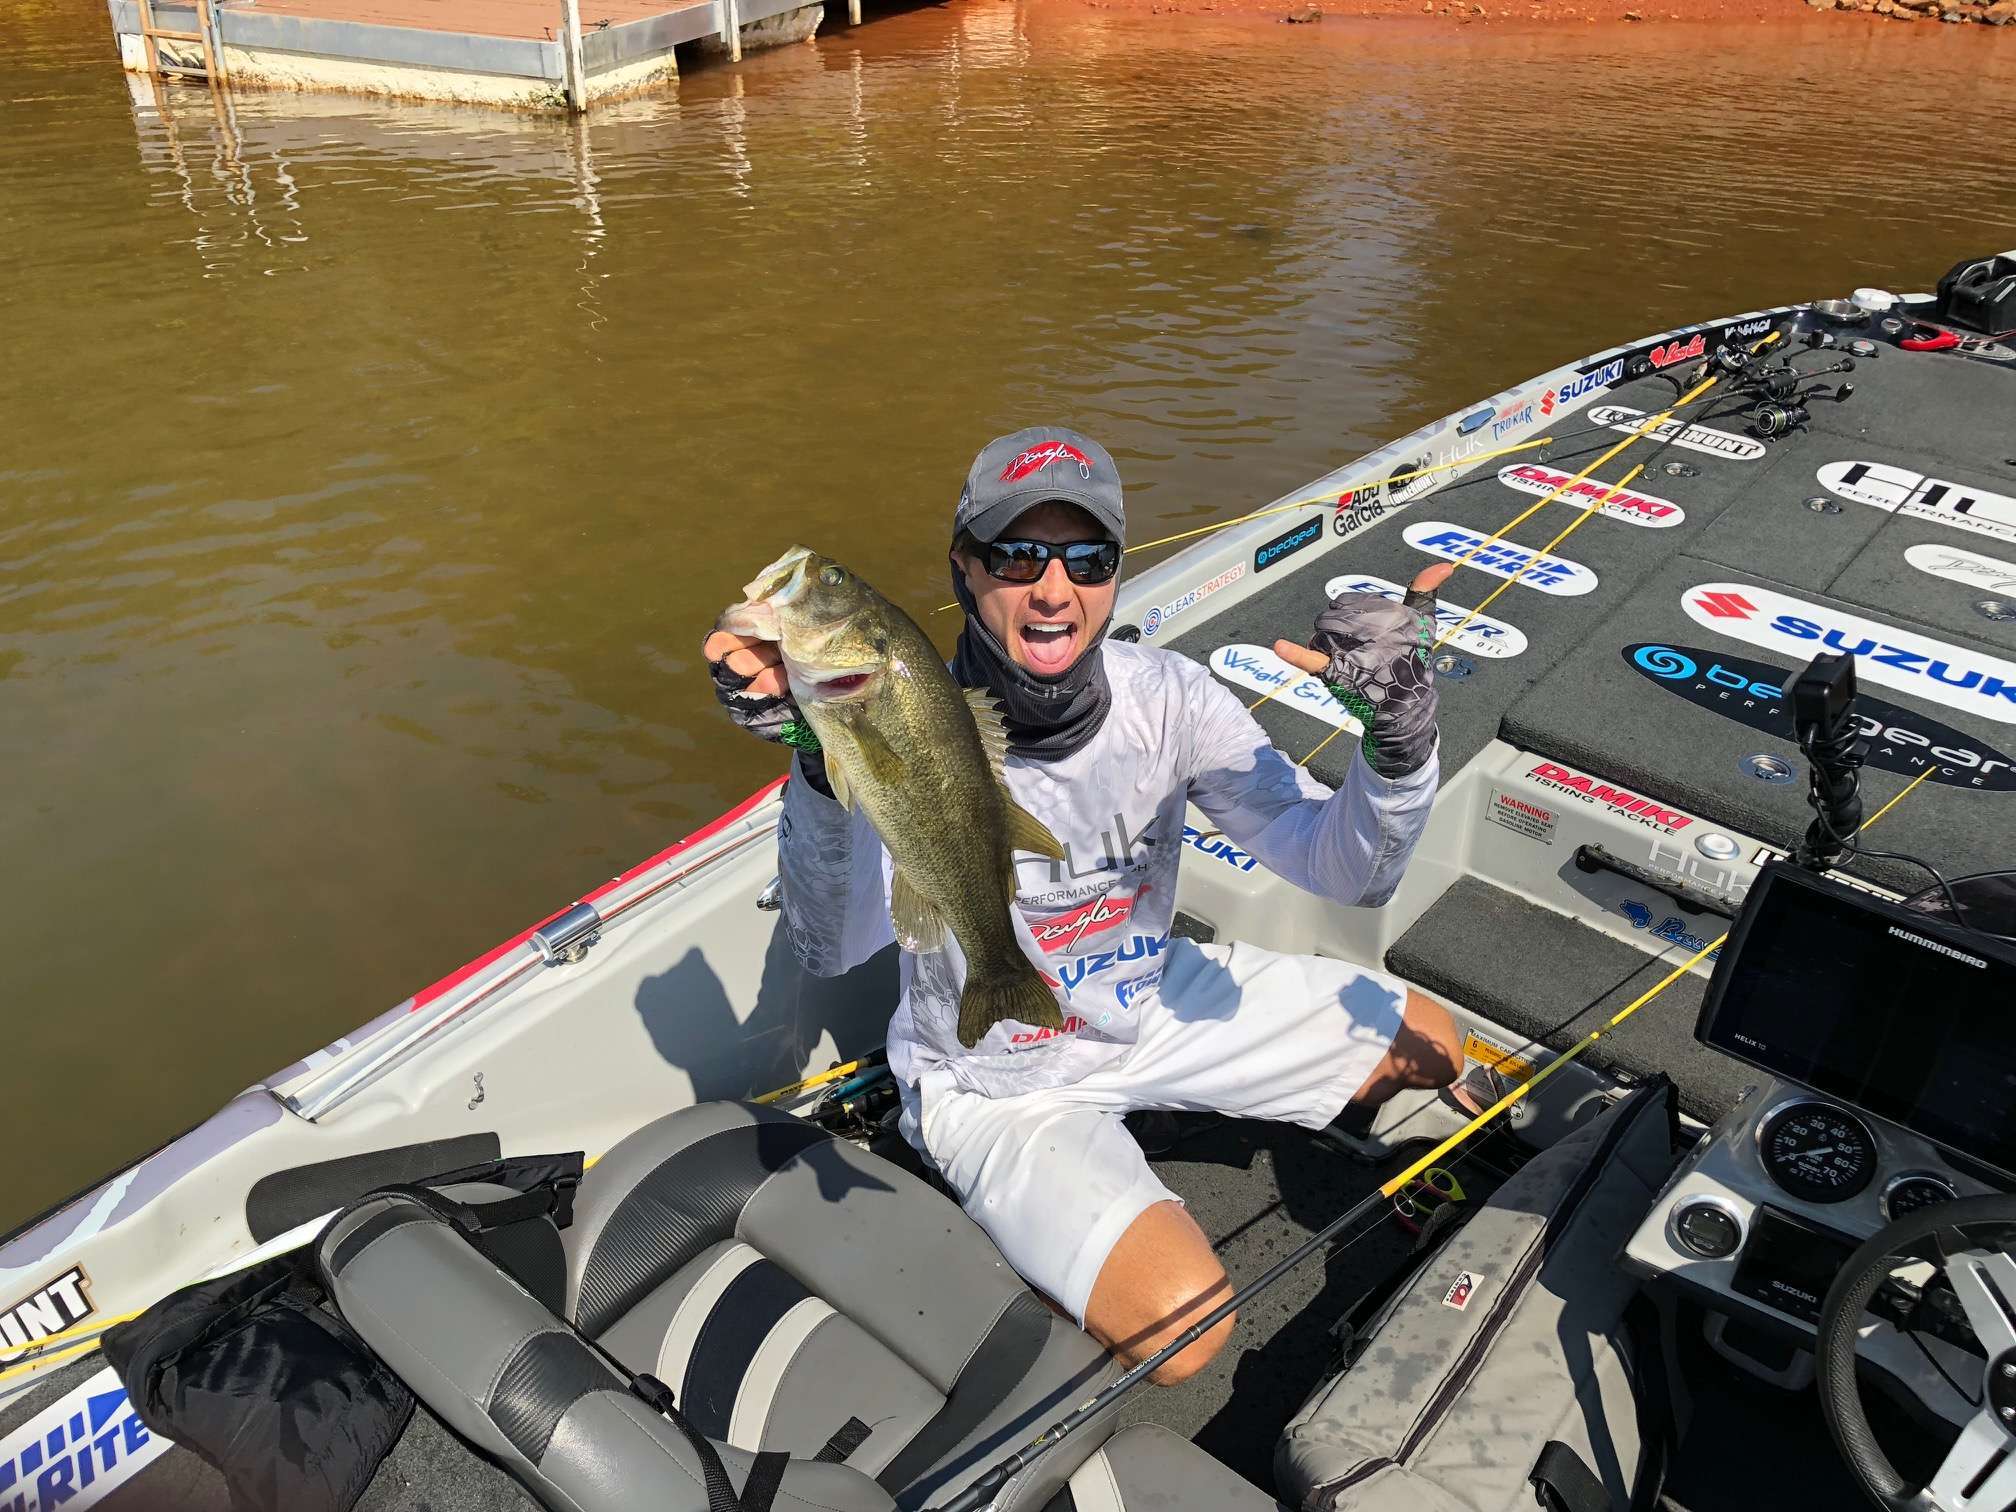 Chad Pipkens has two opportunities at a Classic spot. If he wins the Opens Championship, he would take his name out of the Bracket contention and bump the list down to Fred Roumbanis, who is 56th in the AOY standings. Bumping to Roumbanis is contingent that Lane and Lester do indeed weigh that crucial bass on Day 1 or Day 2.